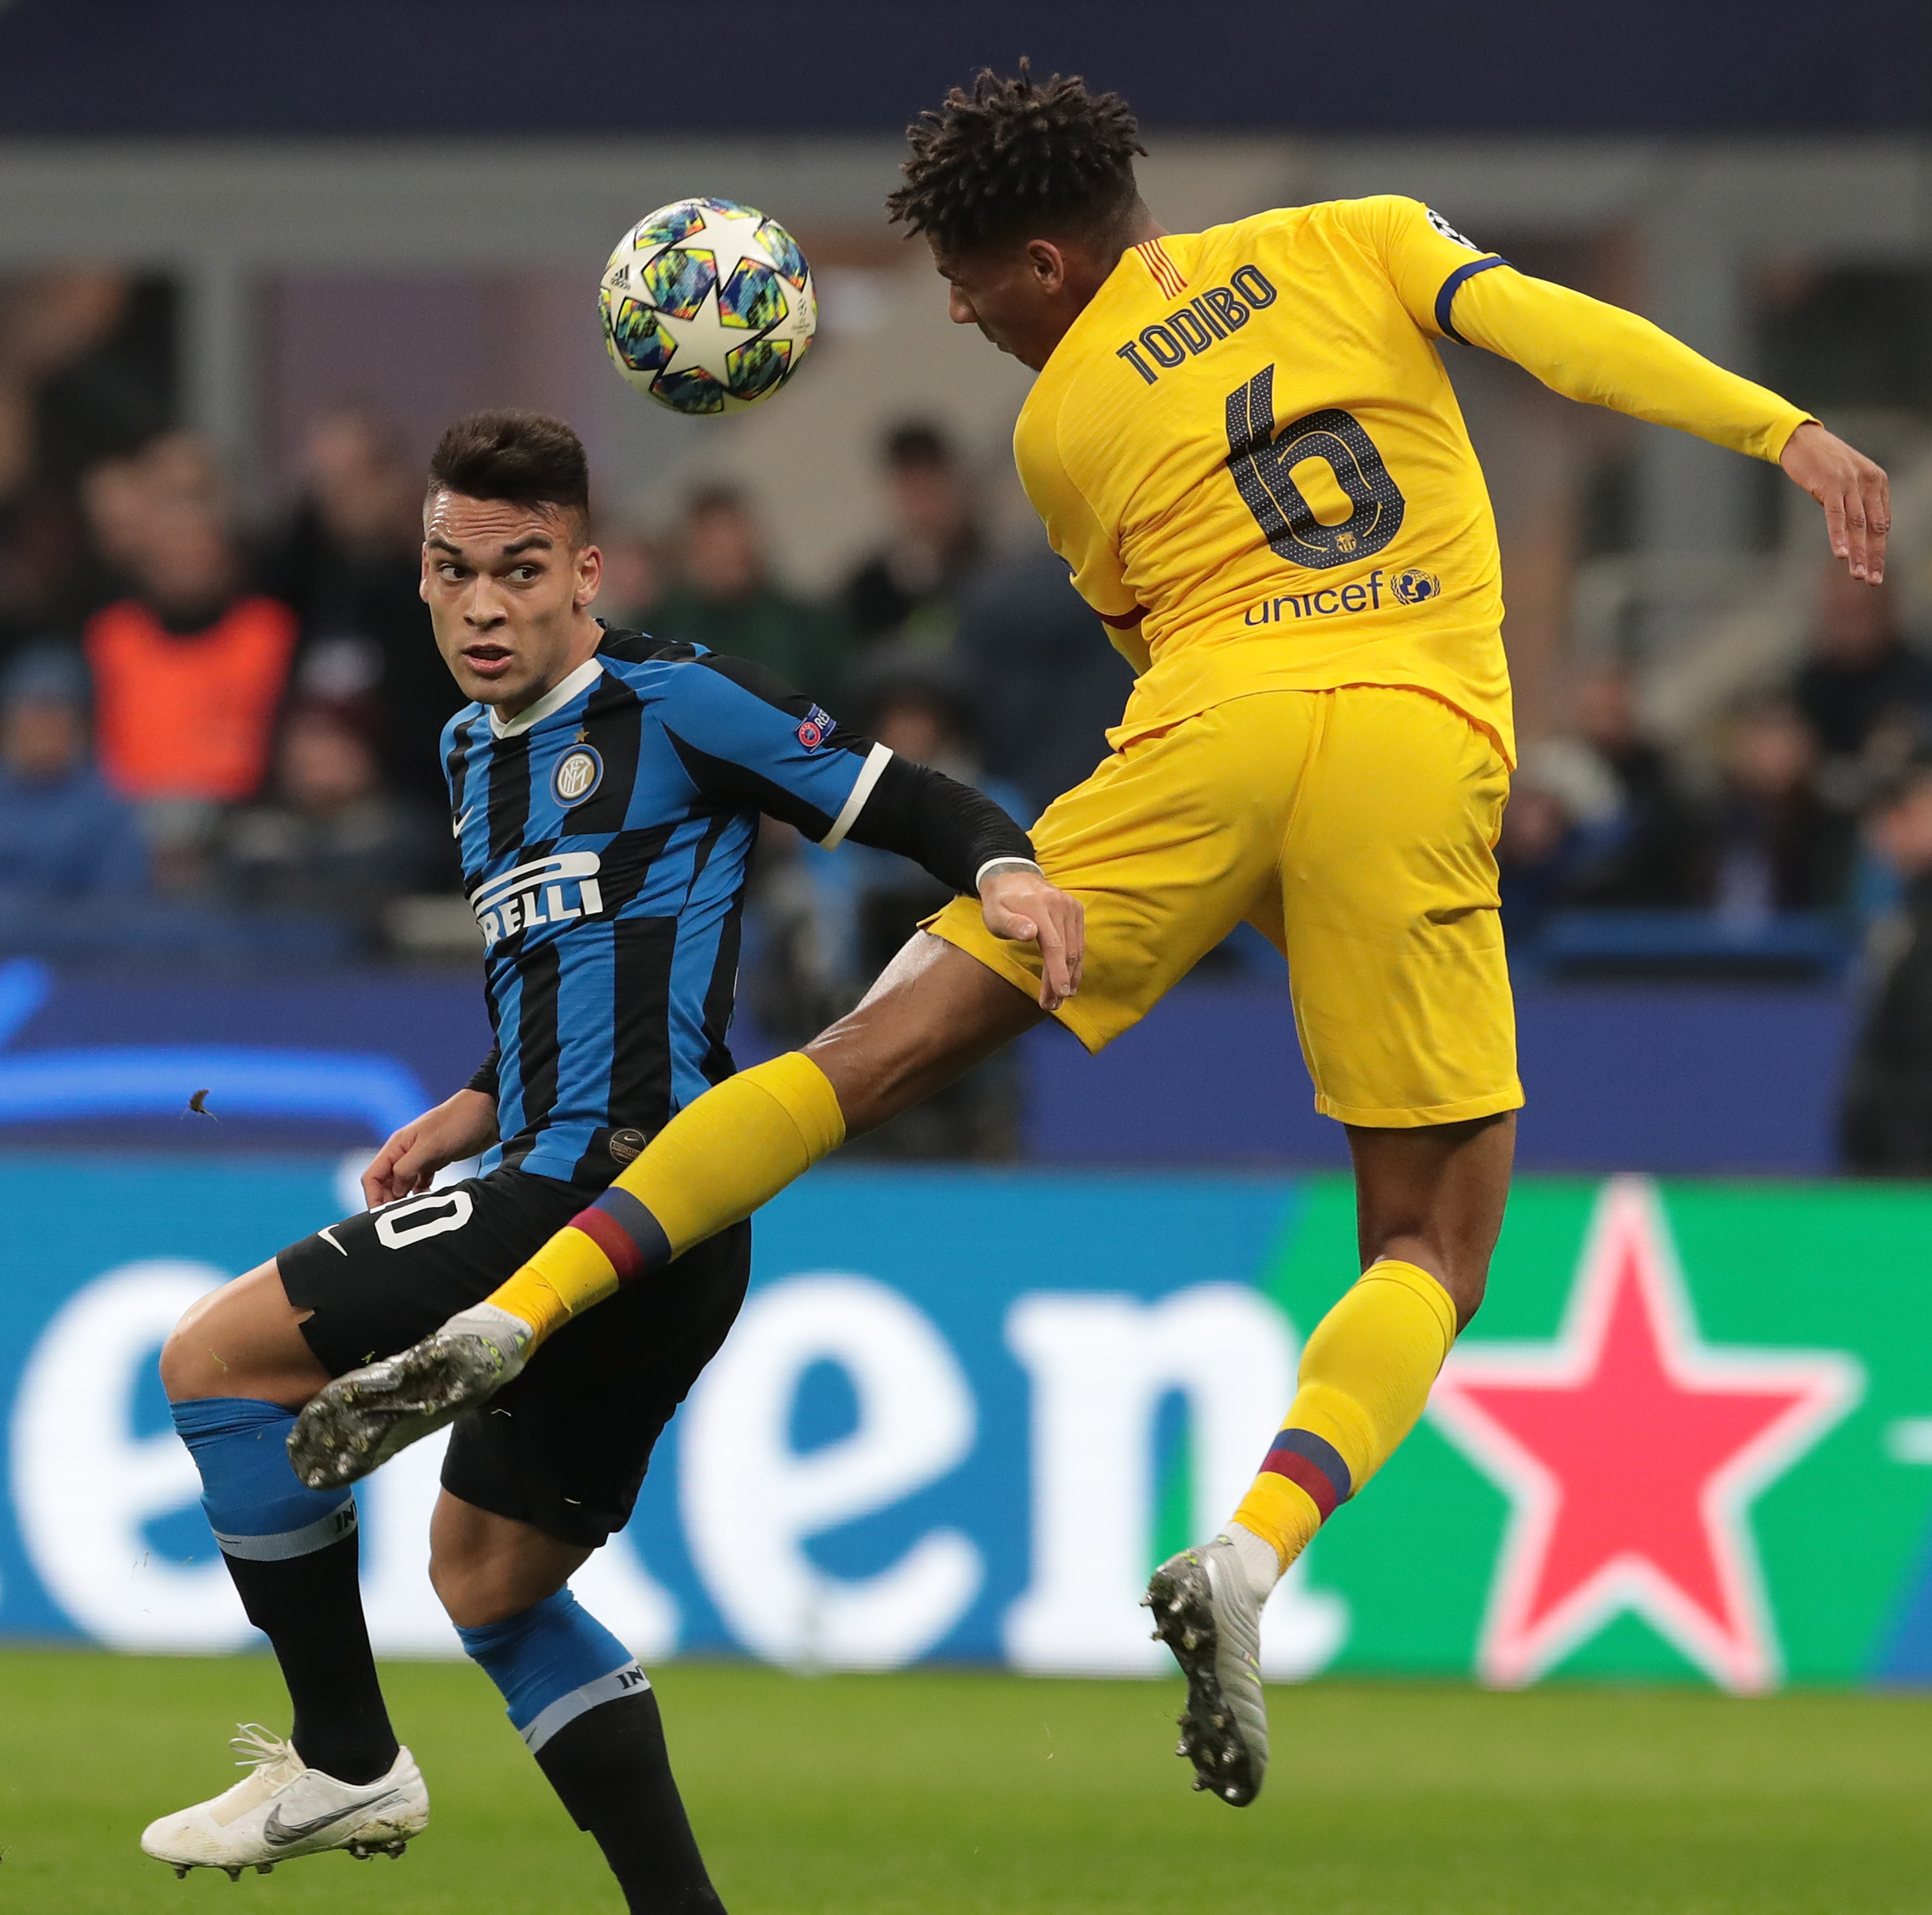 Todibo was solid against Inter, but has failed to become a mainstay in either Schalke or Barcelona. (Photo by Emilio Andreoli/Getty Images)